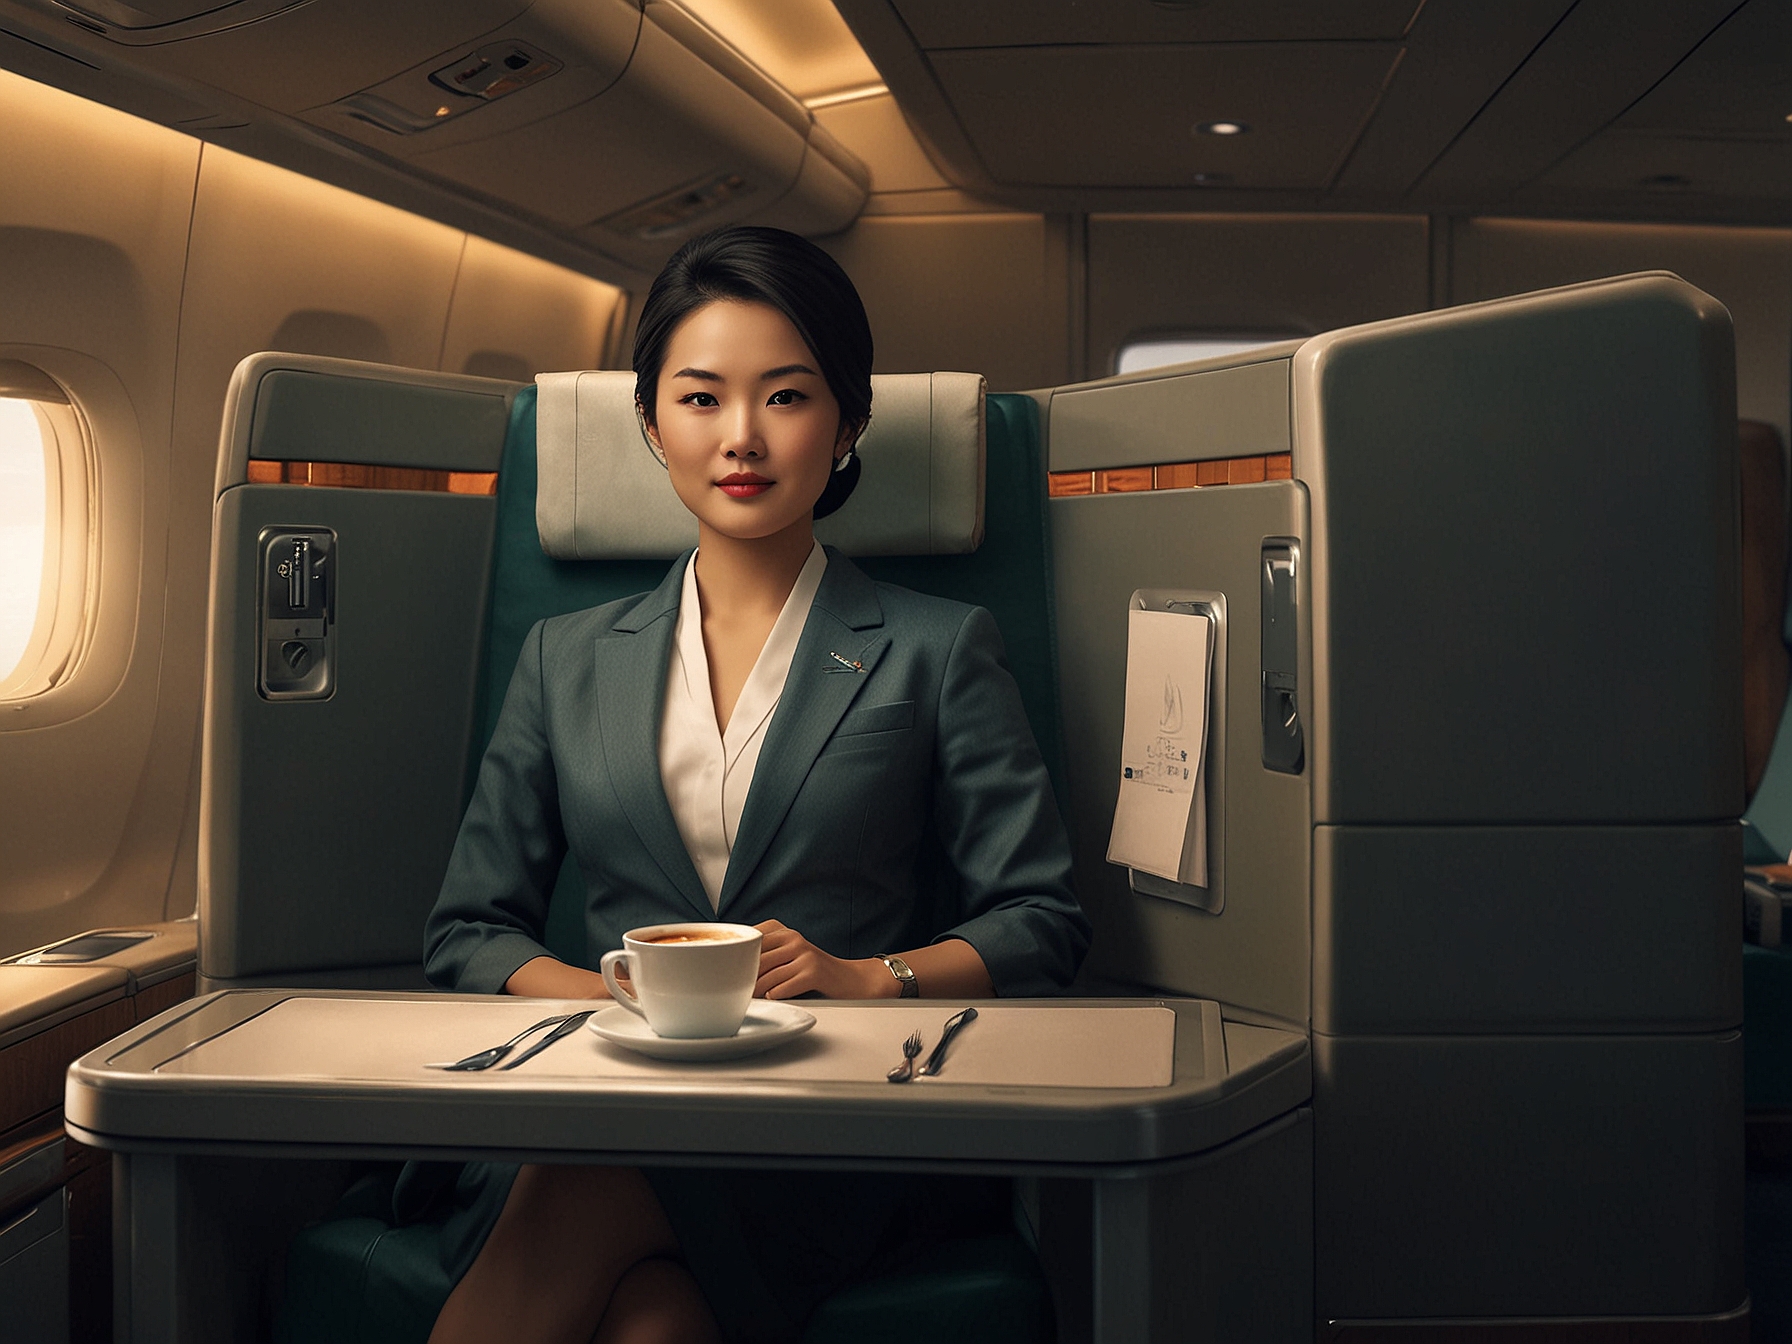 A luxurious shot of Cathay Pacific's business class featuring lie-flat seats, fine dining, and priority boarding services. Harriet highlights superior comfort and service for upscale travelers.